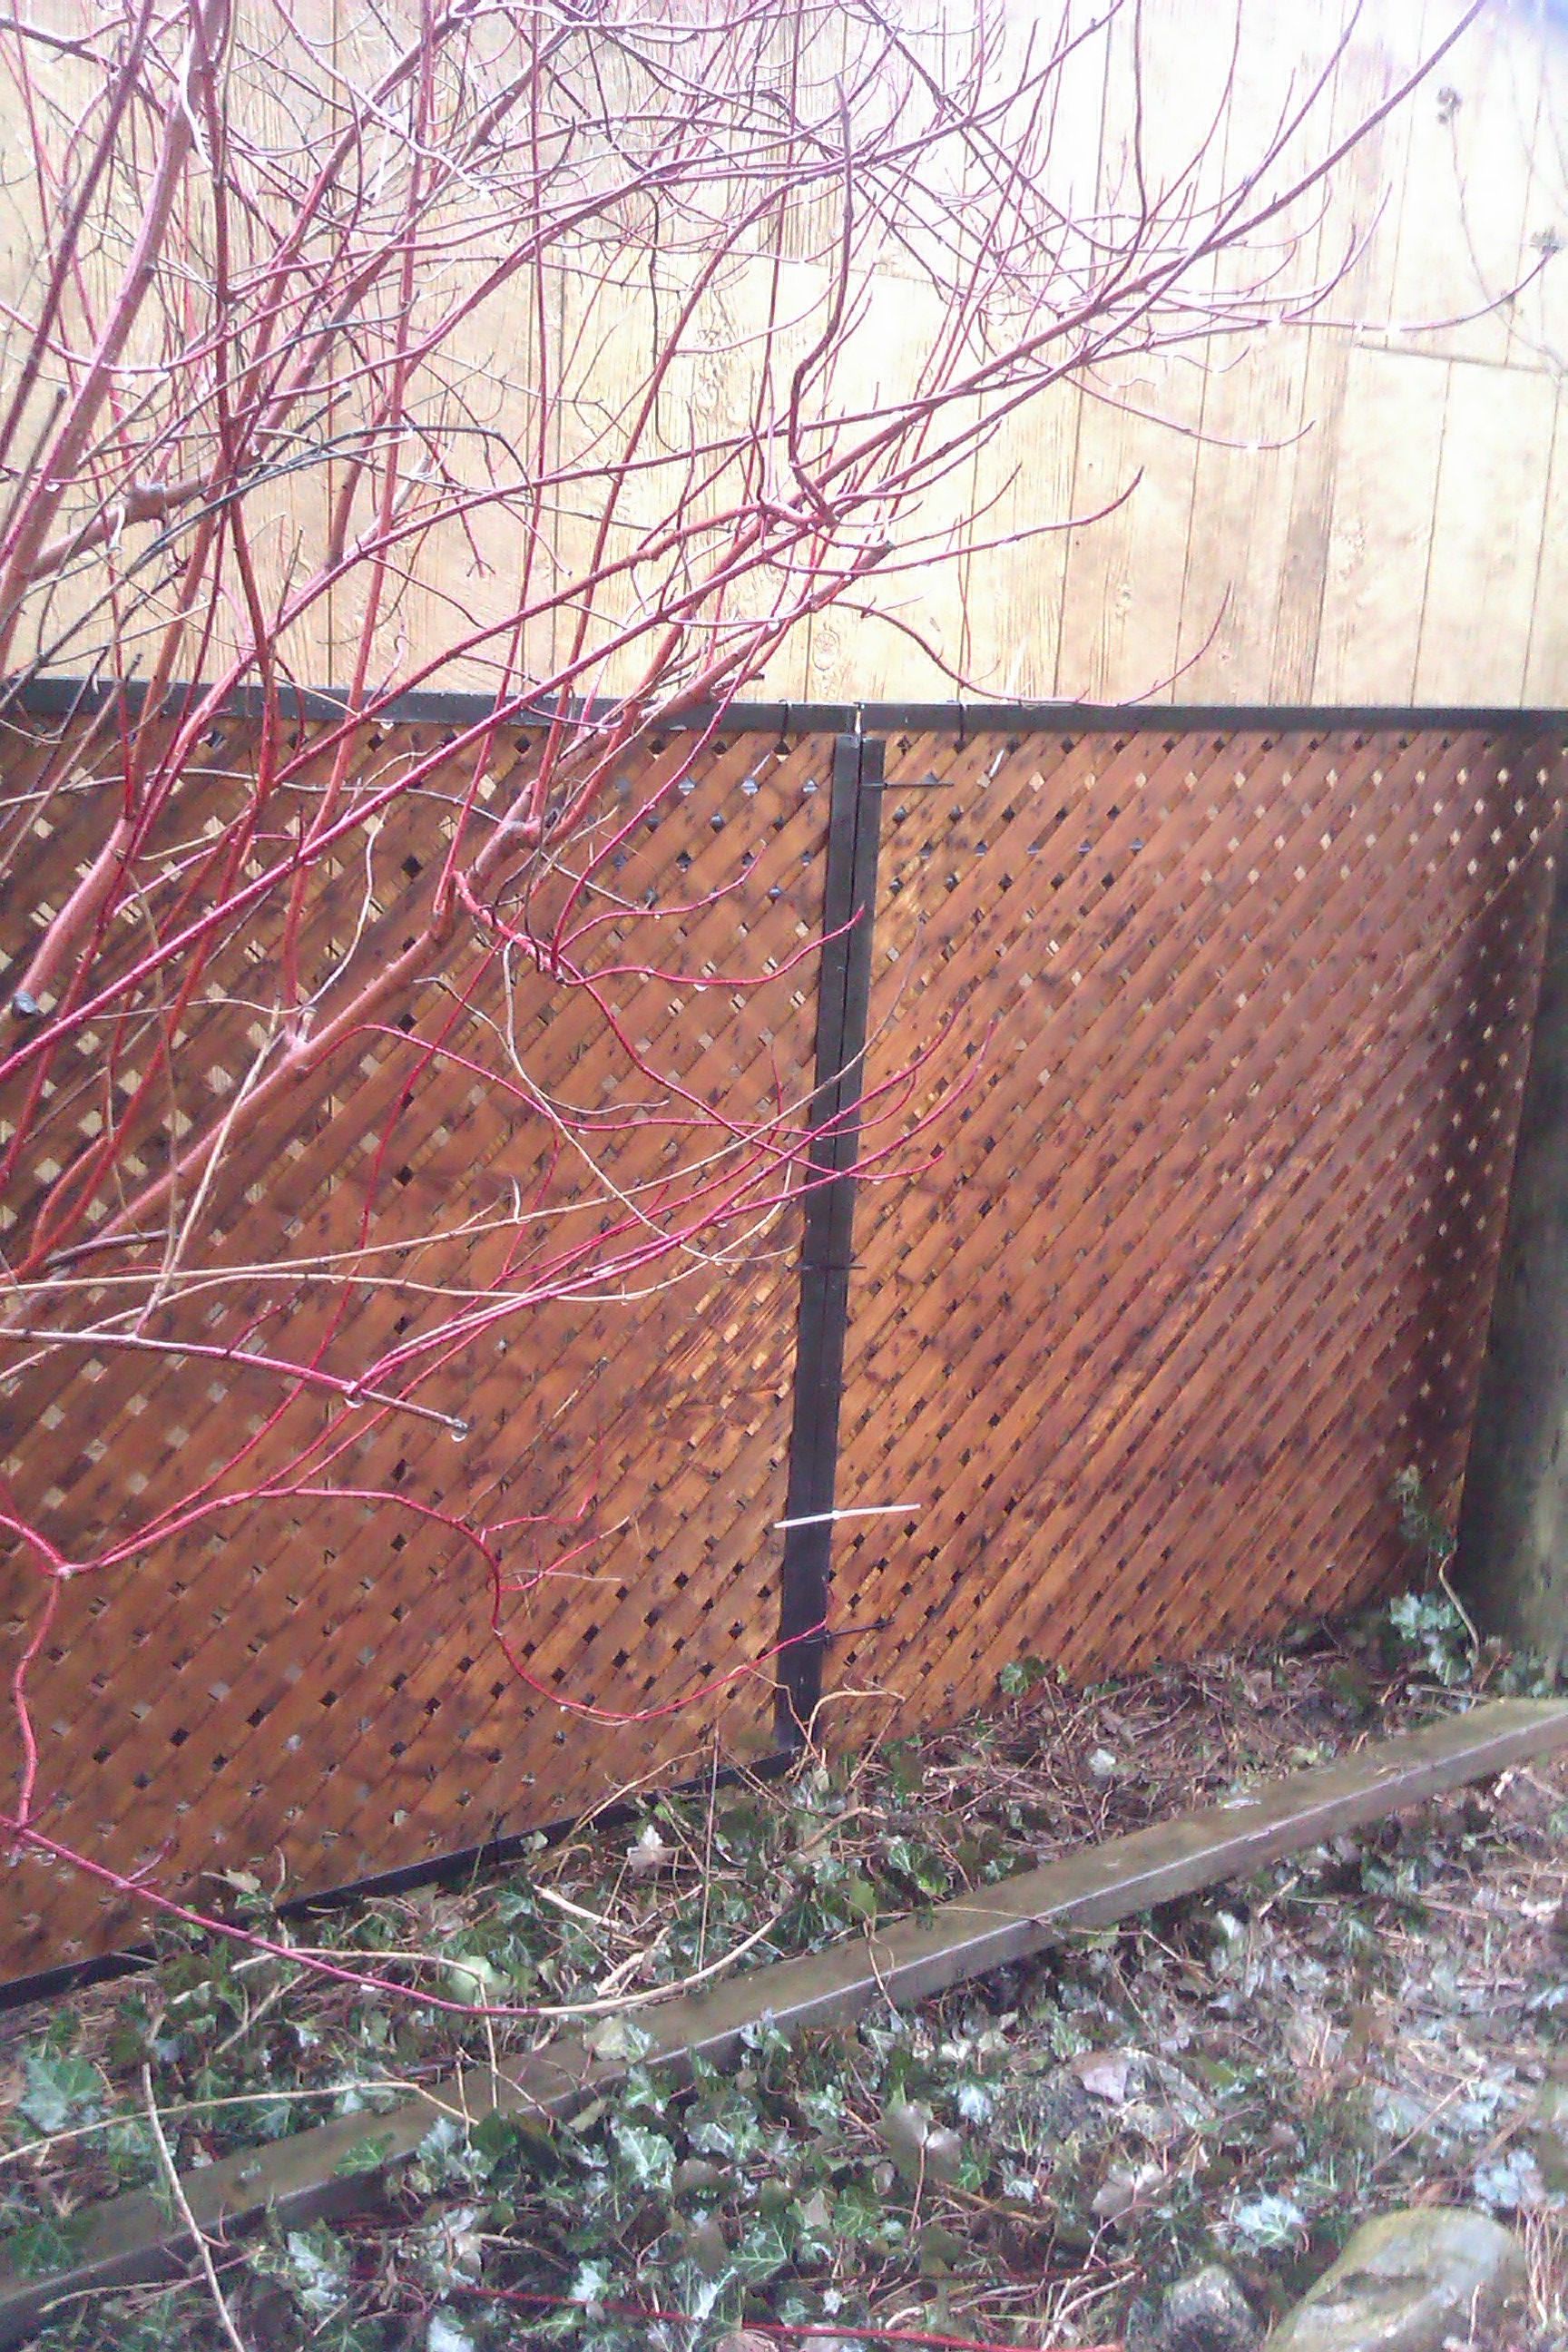 Cover an ugly chain link fence with privacy lattice framed with aluminum J channel ( fits over edges perfectly!!)  I painted the J channel black, a few zip ties to attach everything together and to the chain link fence...$ 325.00 covered 80 feet of ugliness!  I am proud of this project. ( one person project too!)  Use black zip ties...as you can see white is ugly. -   24 fitness design link
 ideas